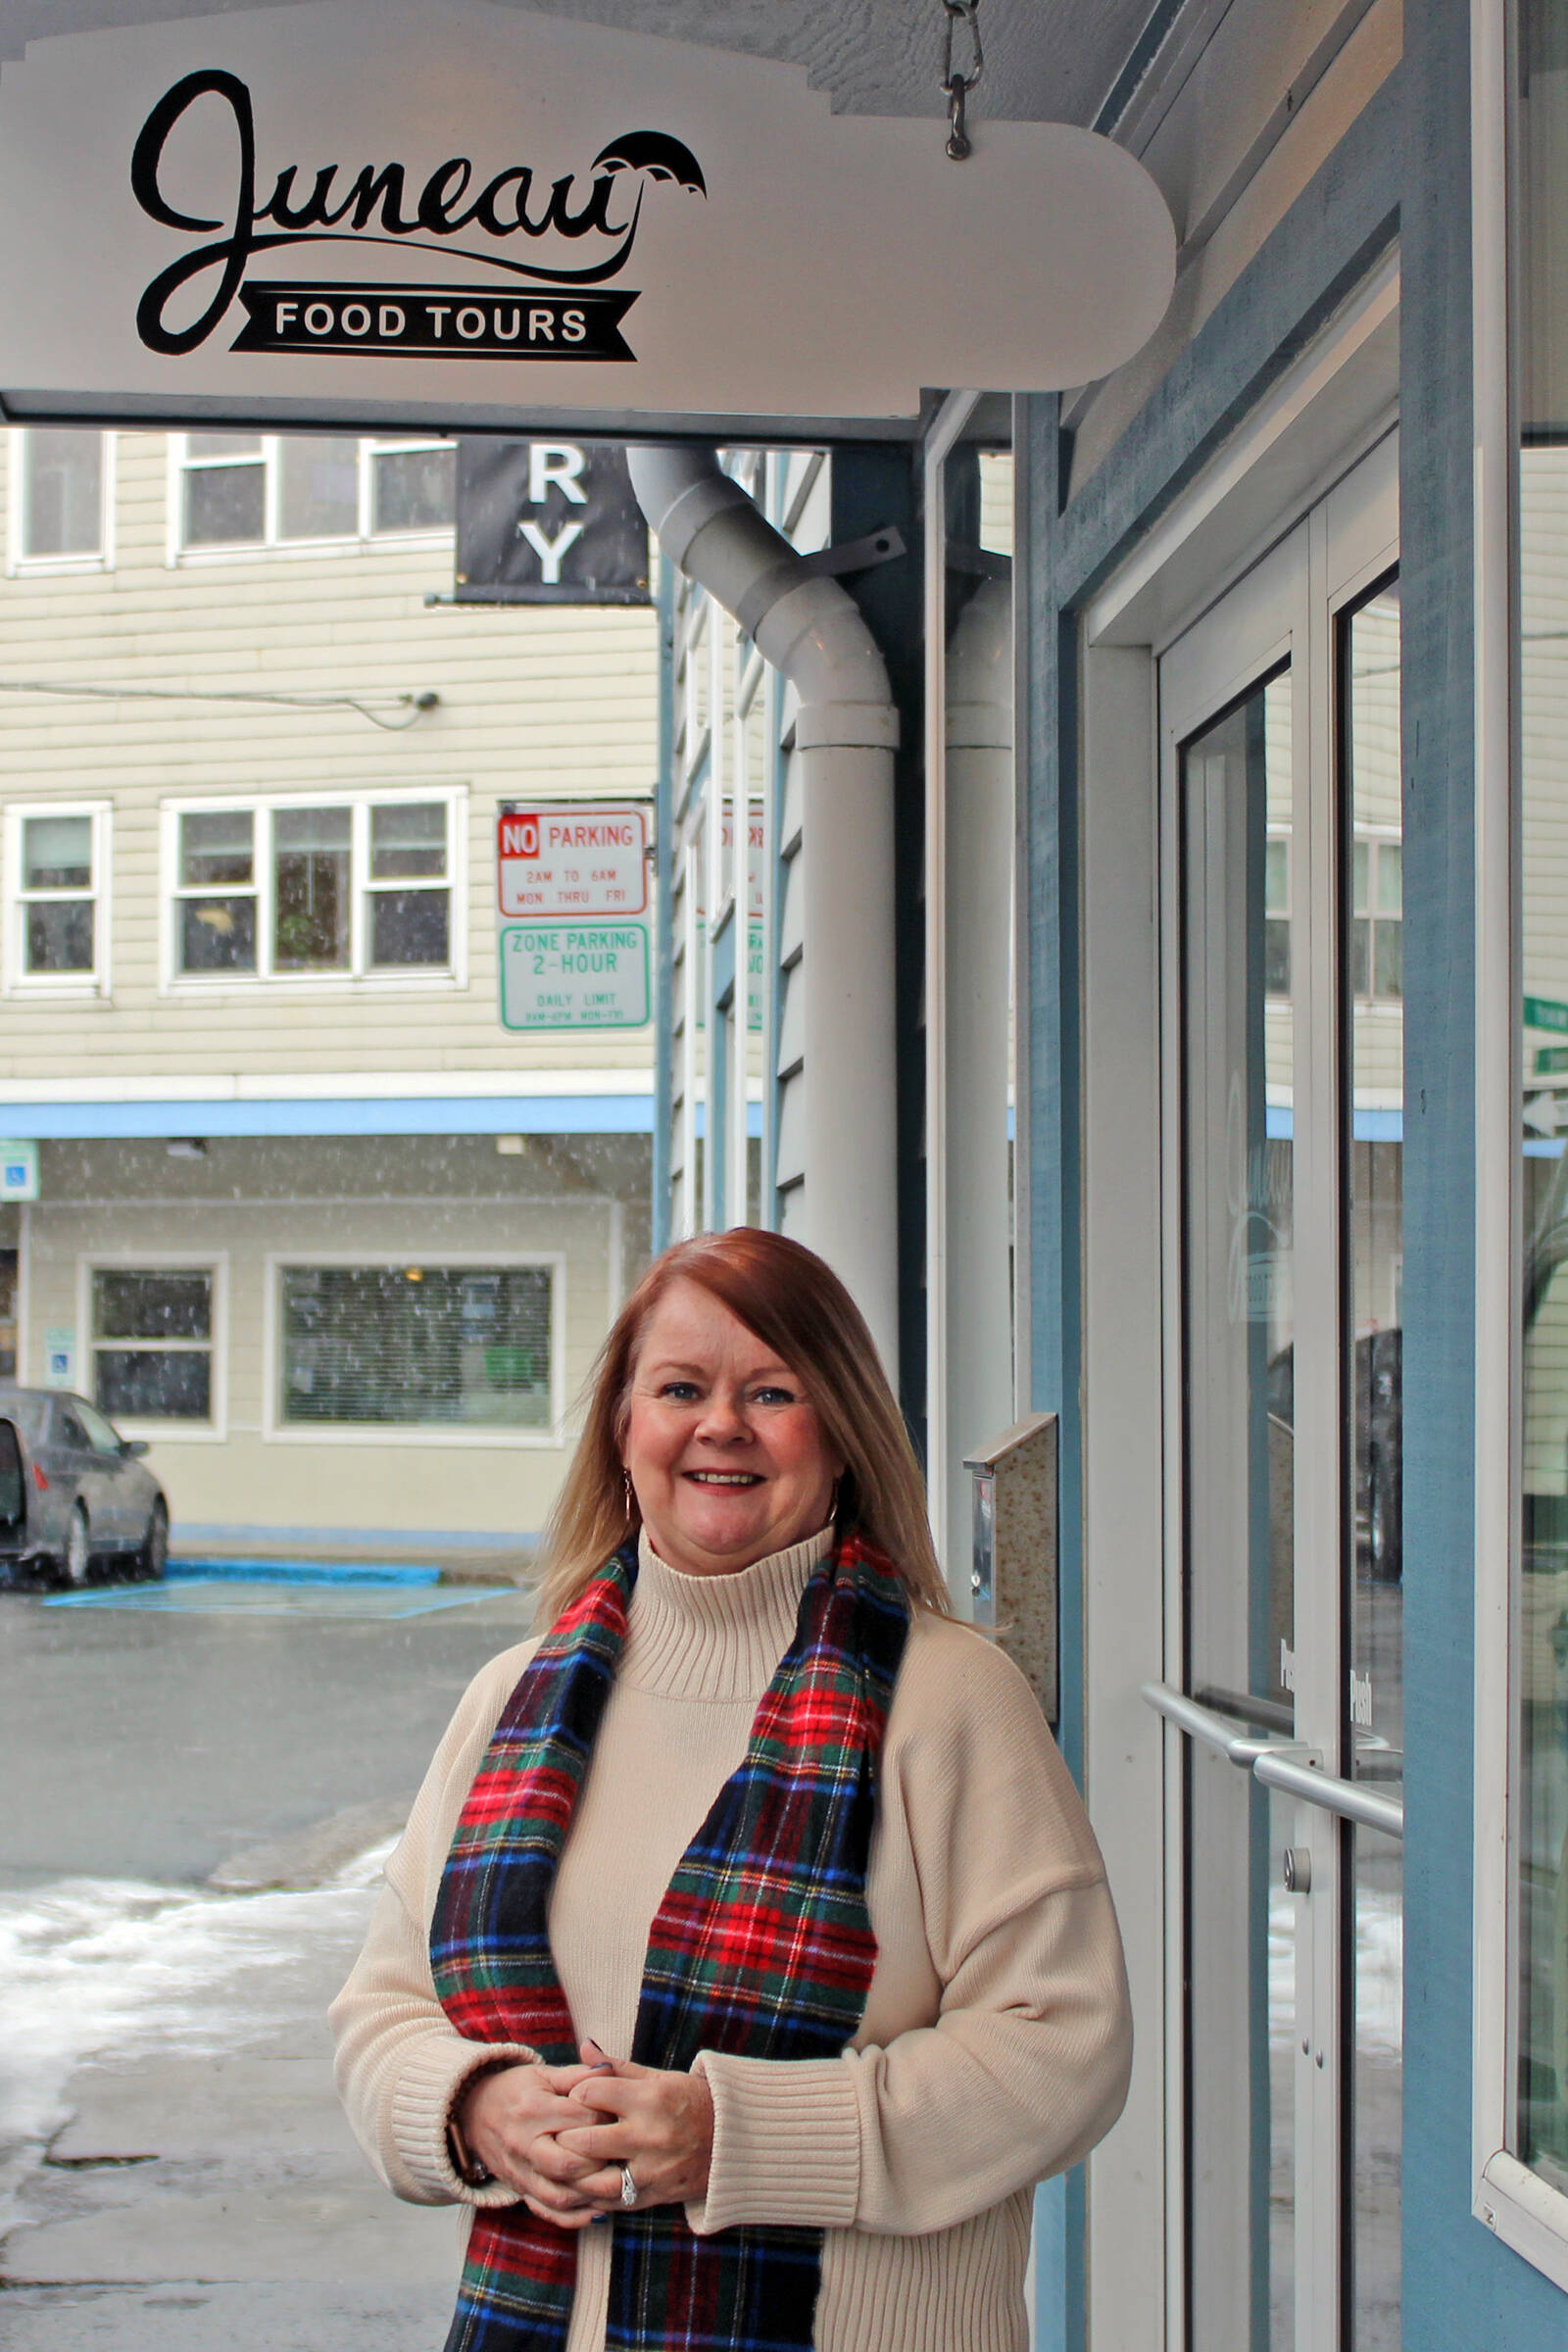 Midgi Moore, Juneau Food Tours’ CEO, stands outside her shop on Nov. 23. She is one of many local business owners whose businesses have been severely harmed by the disruption to cruise ship travel caused by COVID-19. She said in 2019, her business hosted over 3,000 customers on food tours. In 2020, that number plummeted to 24. She’s served 775 customers as of Nov. 7, 2021. (Dana Zigmund / Juneau Empire)